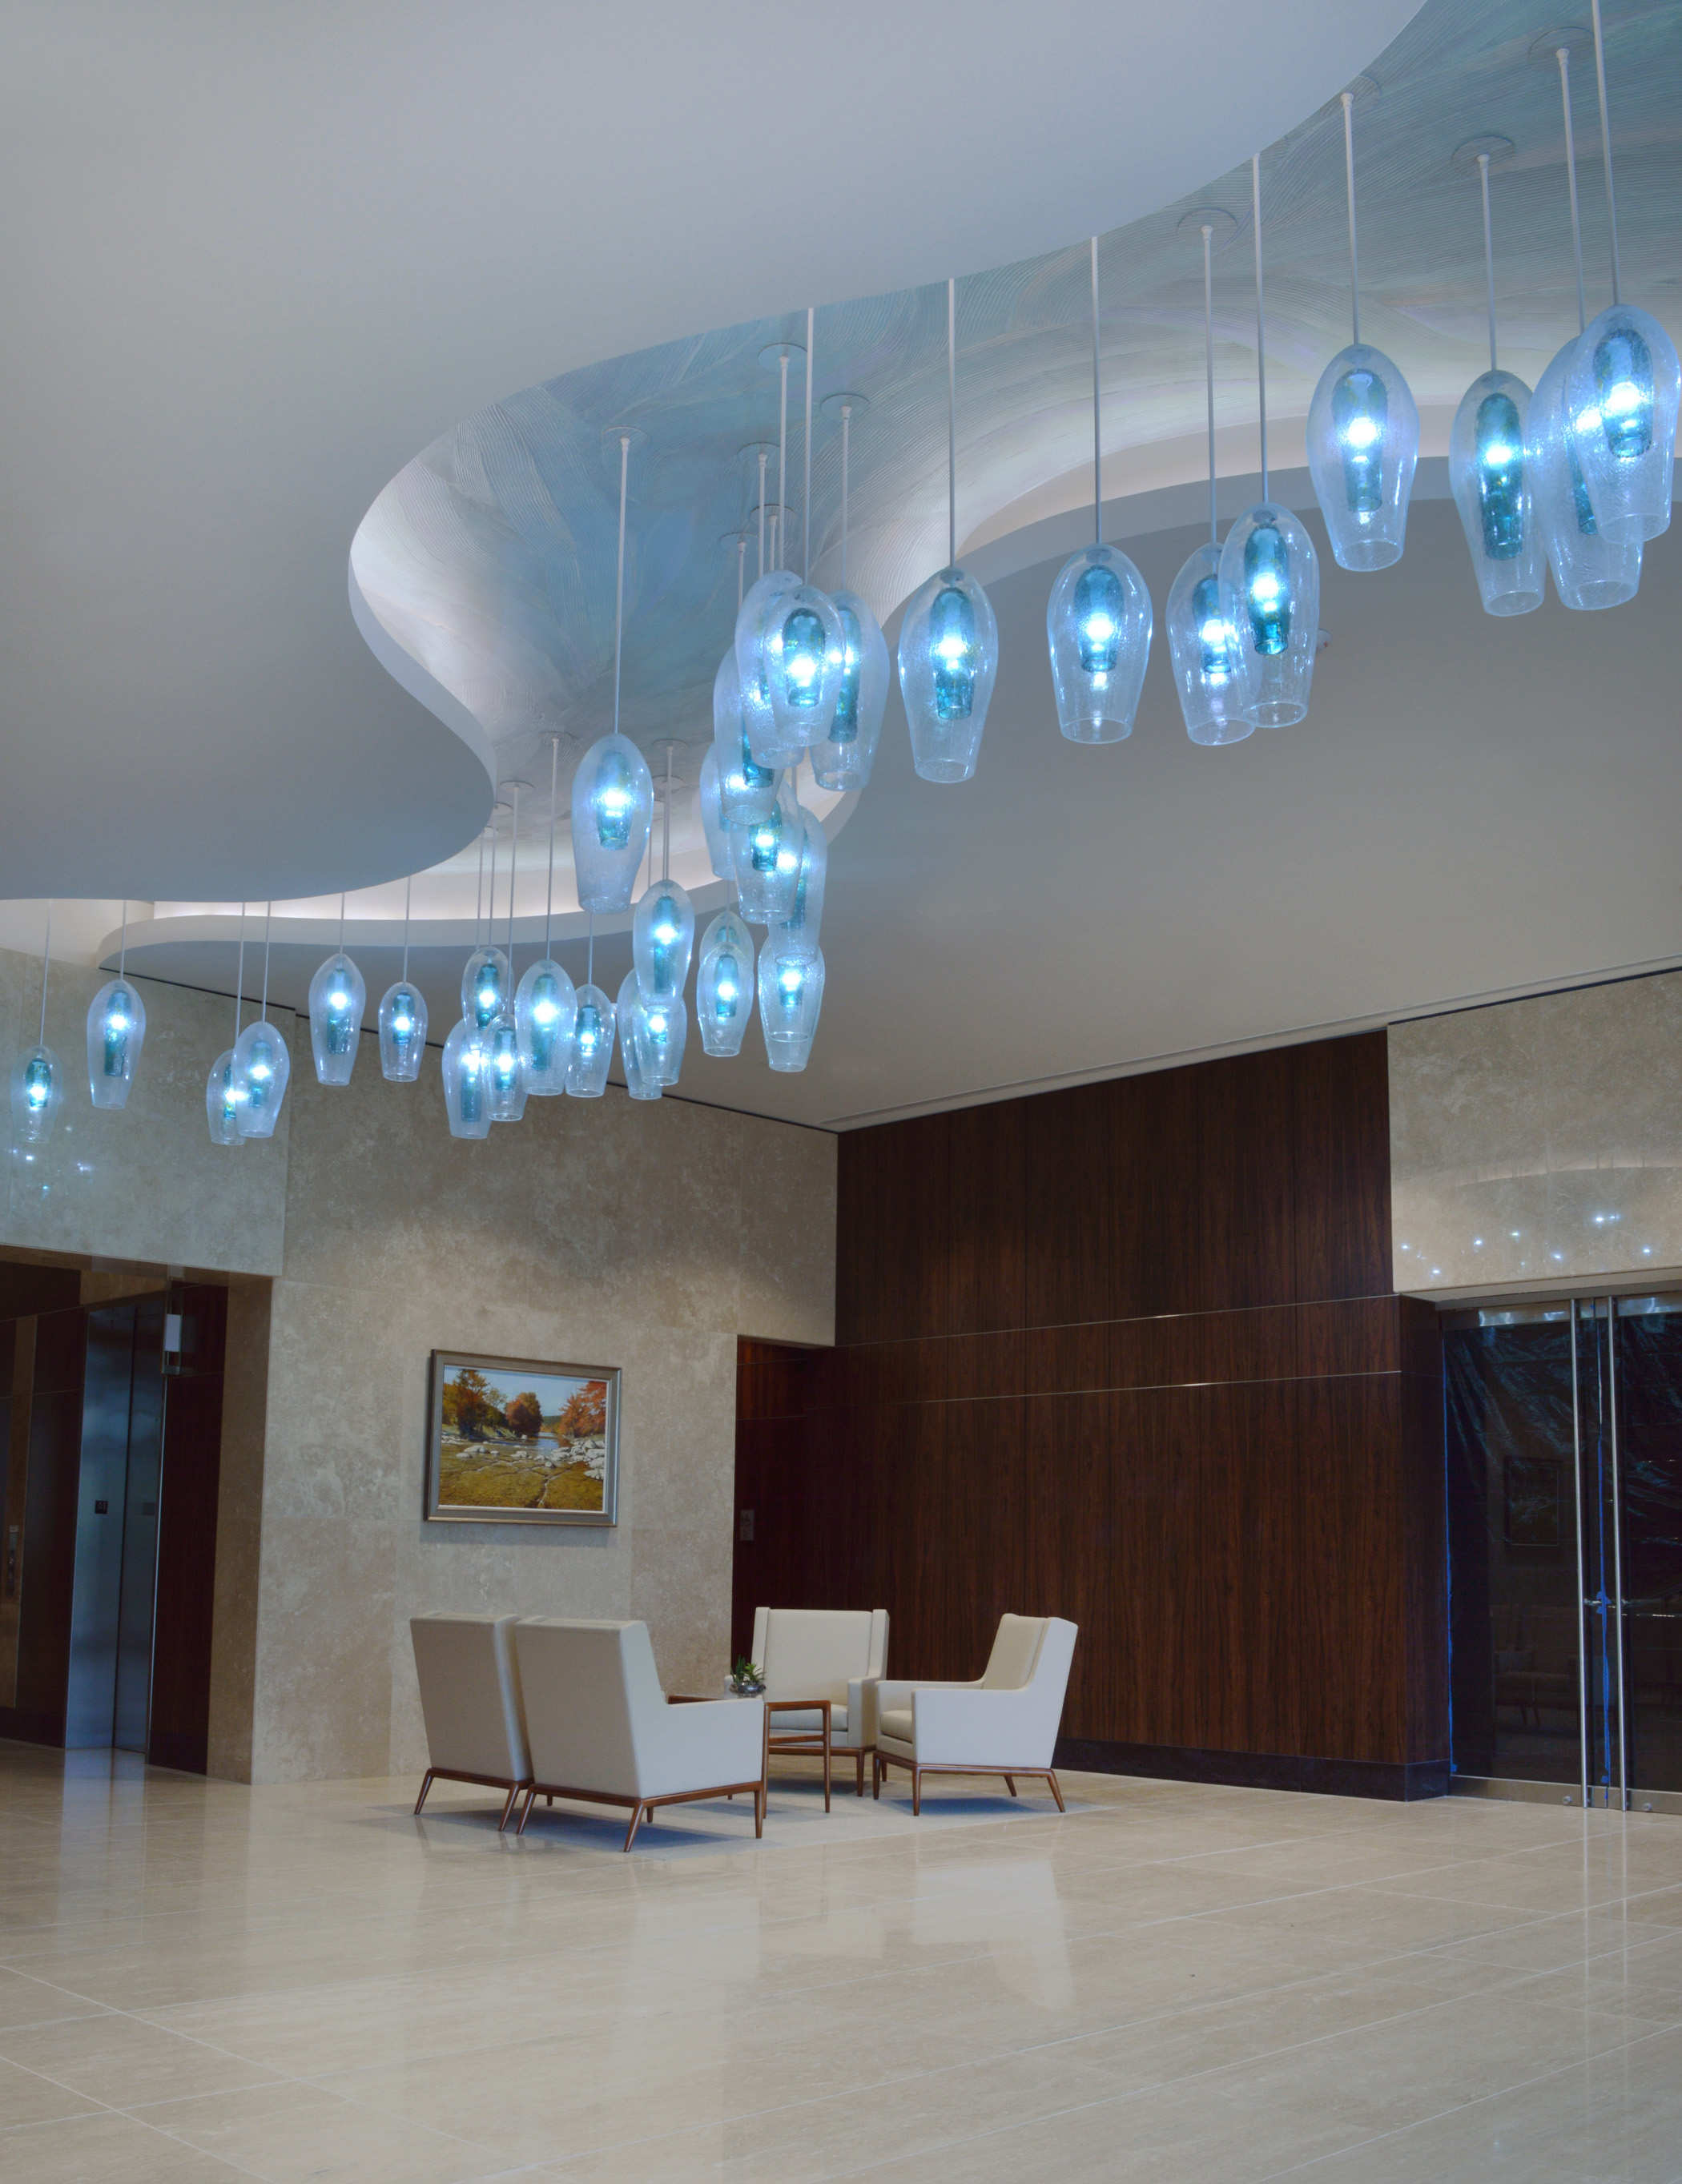 Wimberley Glassworks Briarpark Houston Blown Glass Lighting Installation North Lobby up view for web (2).jpg